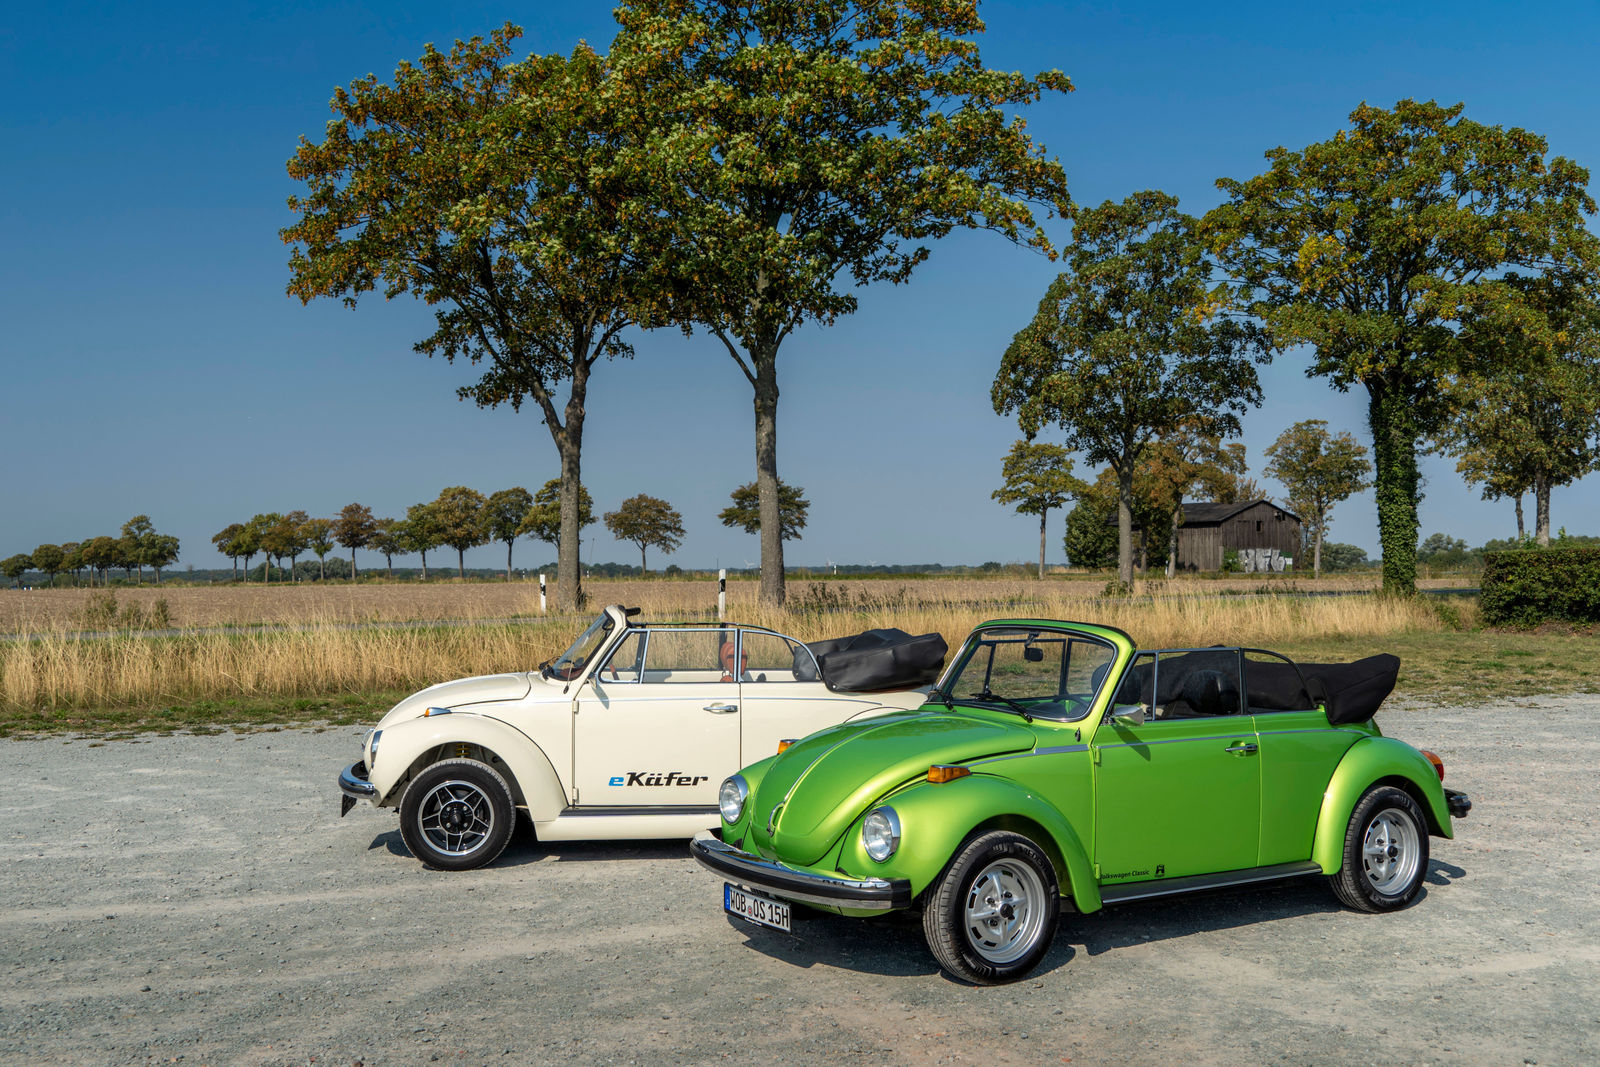 The e-Beetle and a green Beetle with boxer engine